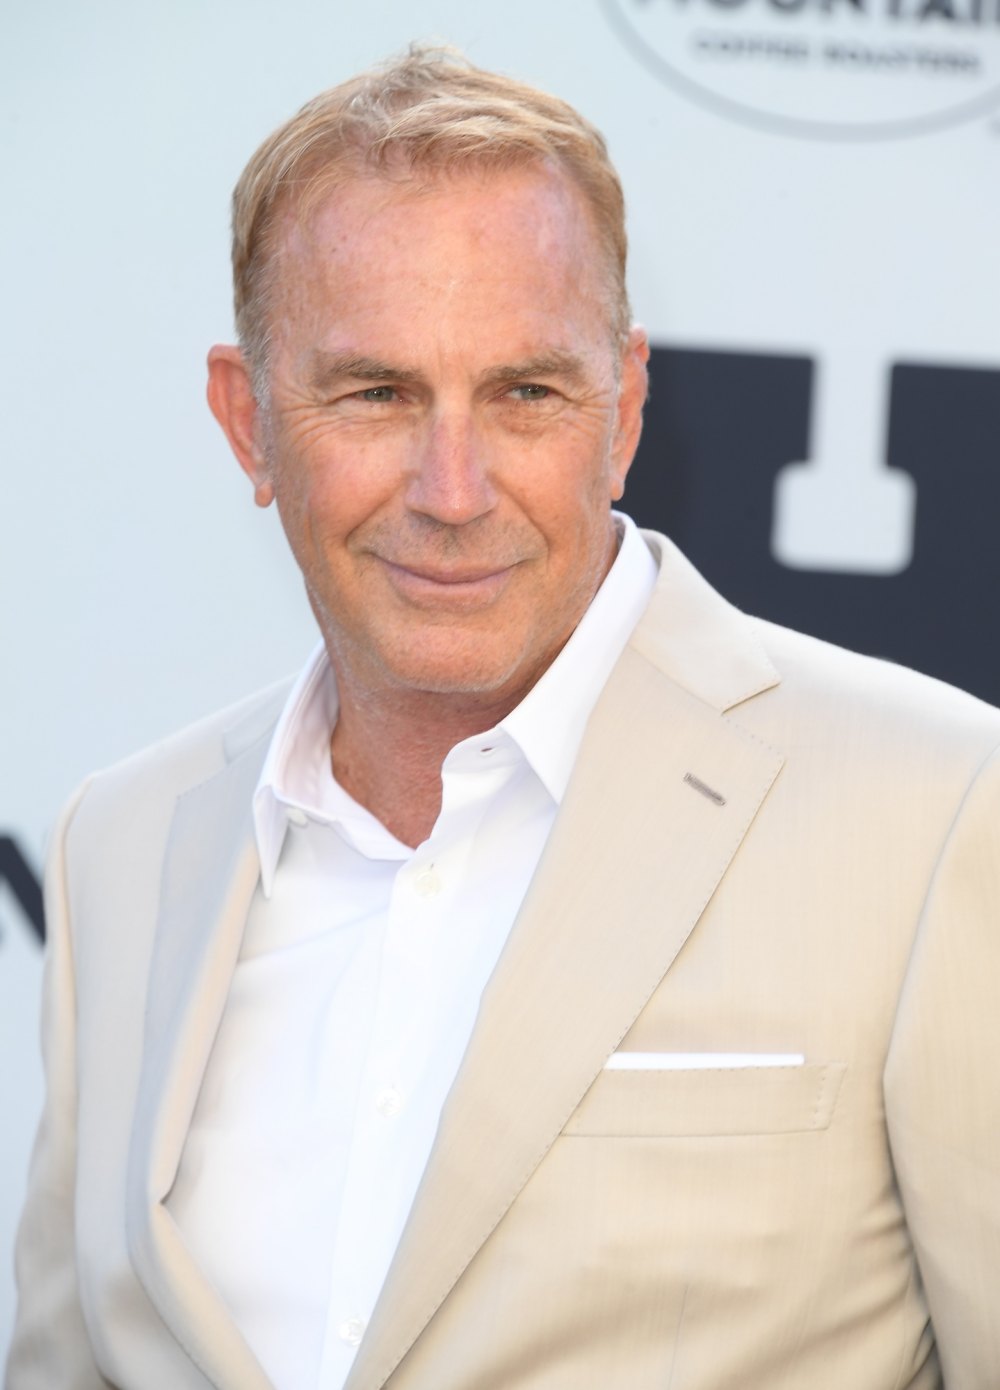 Kevin Costner Knows He ‘Makes Movies for Men’